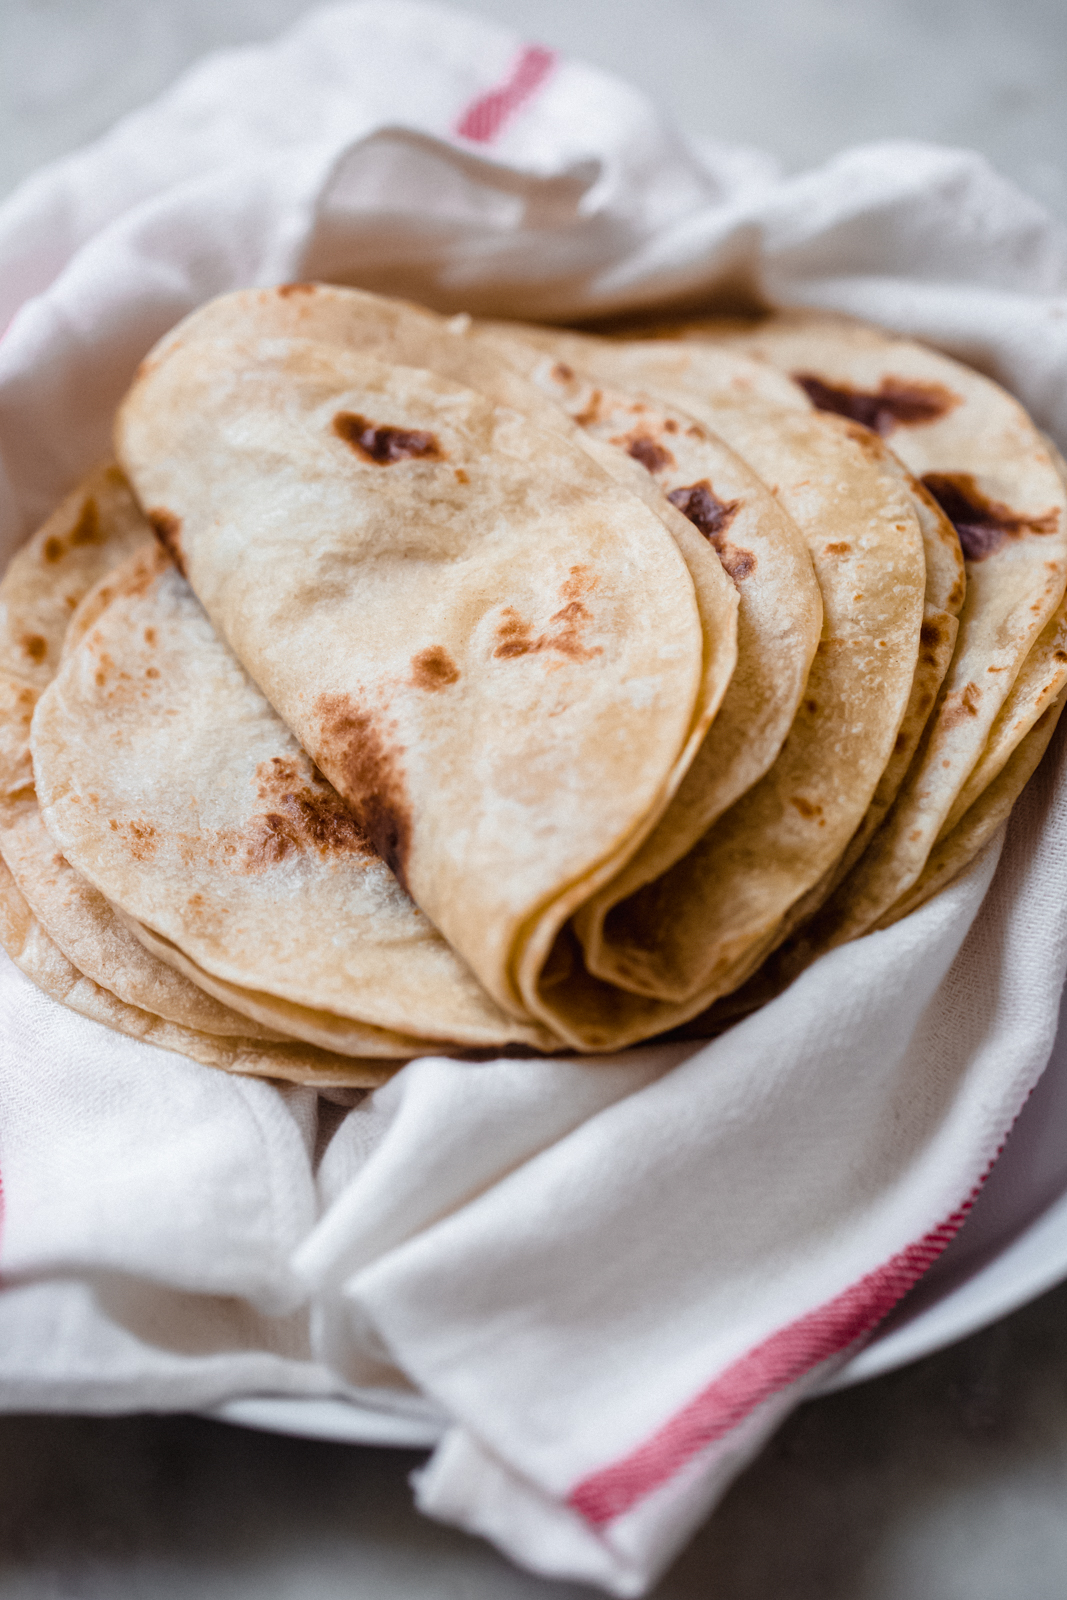 3 Ingredients Oat Tortillas - Soft & Easy to Make